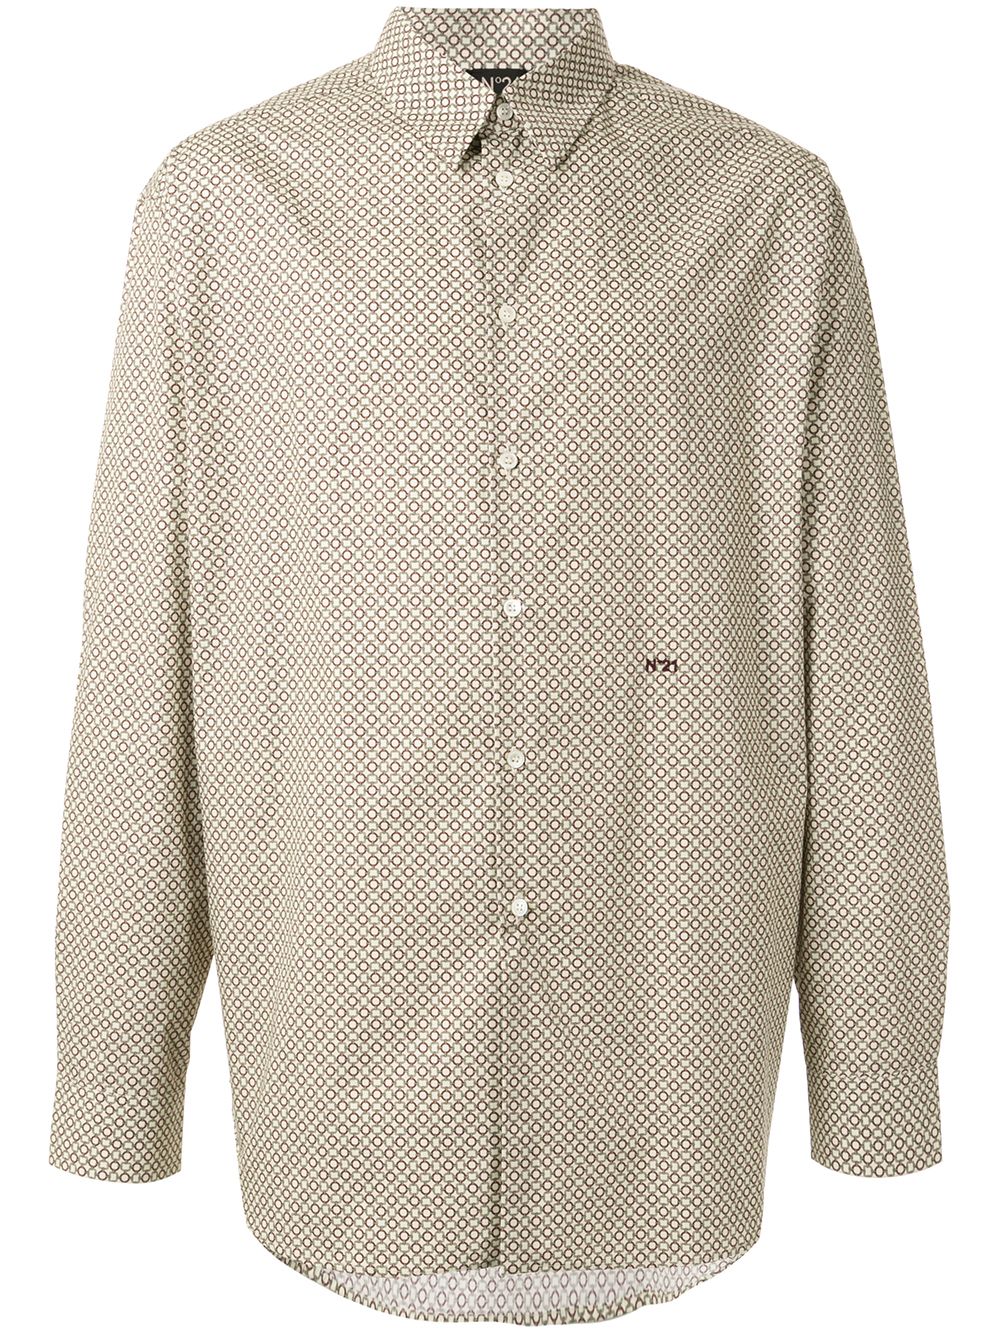 N°21 Oversized Printed Shirt In Neutrals